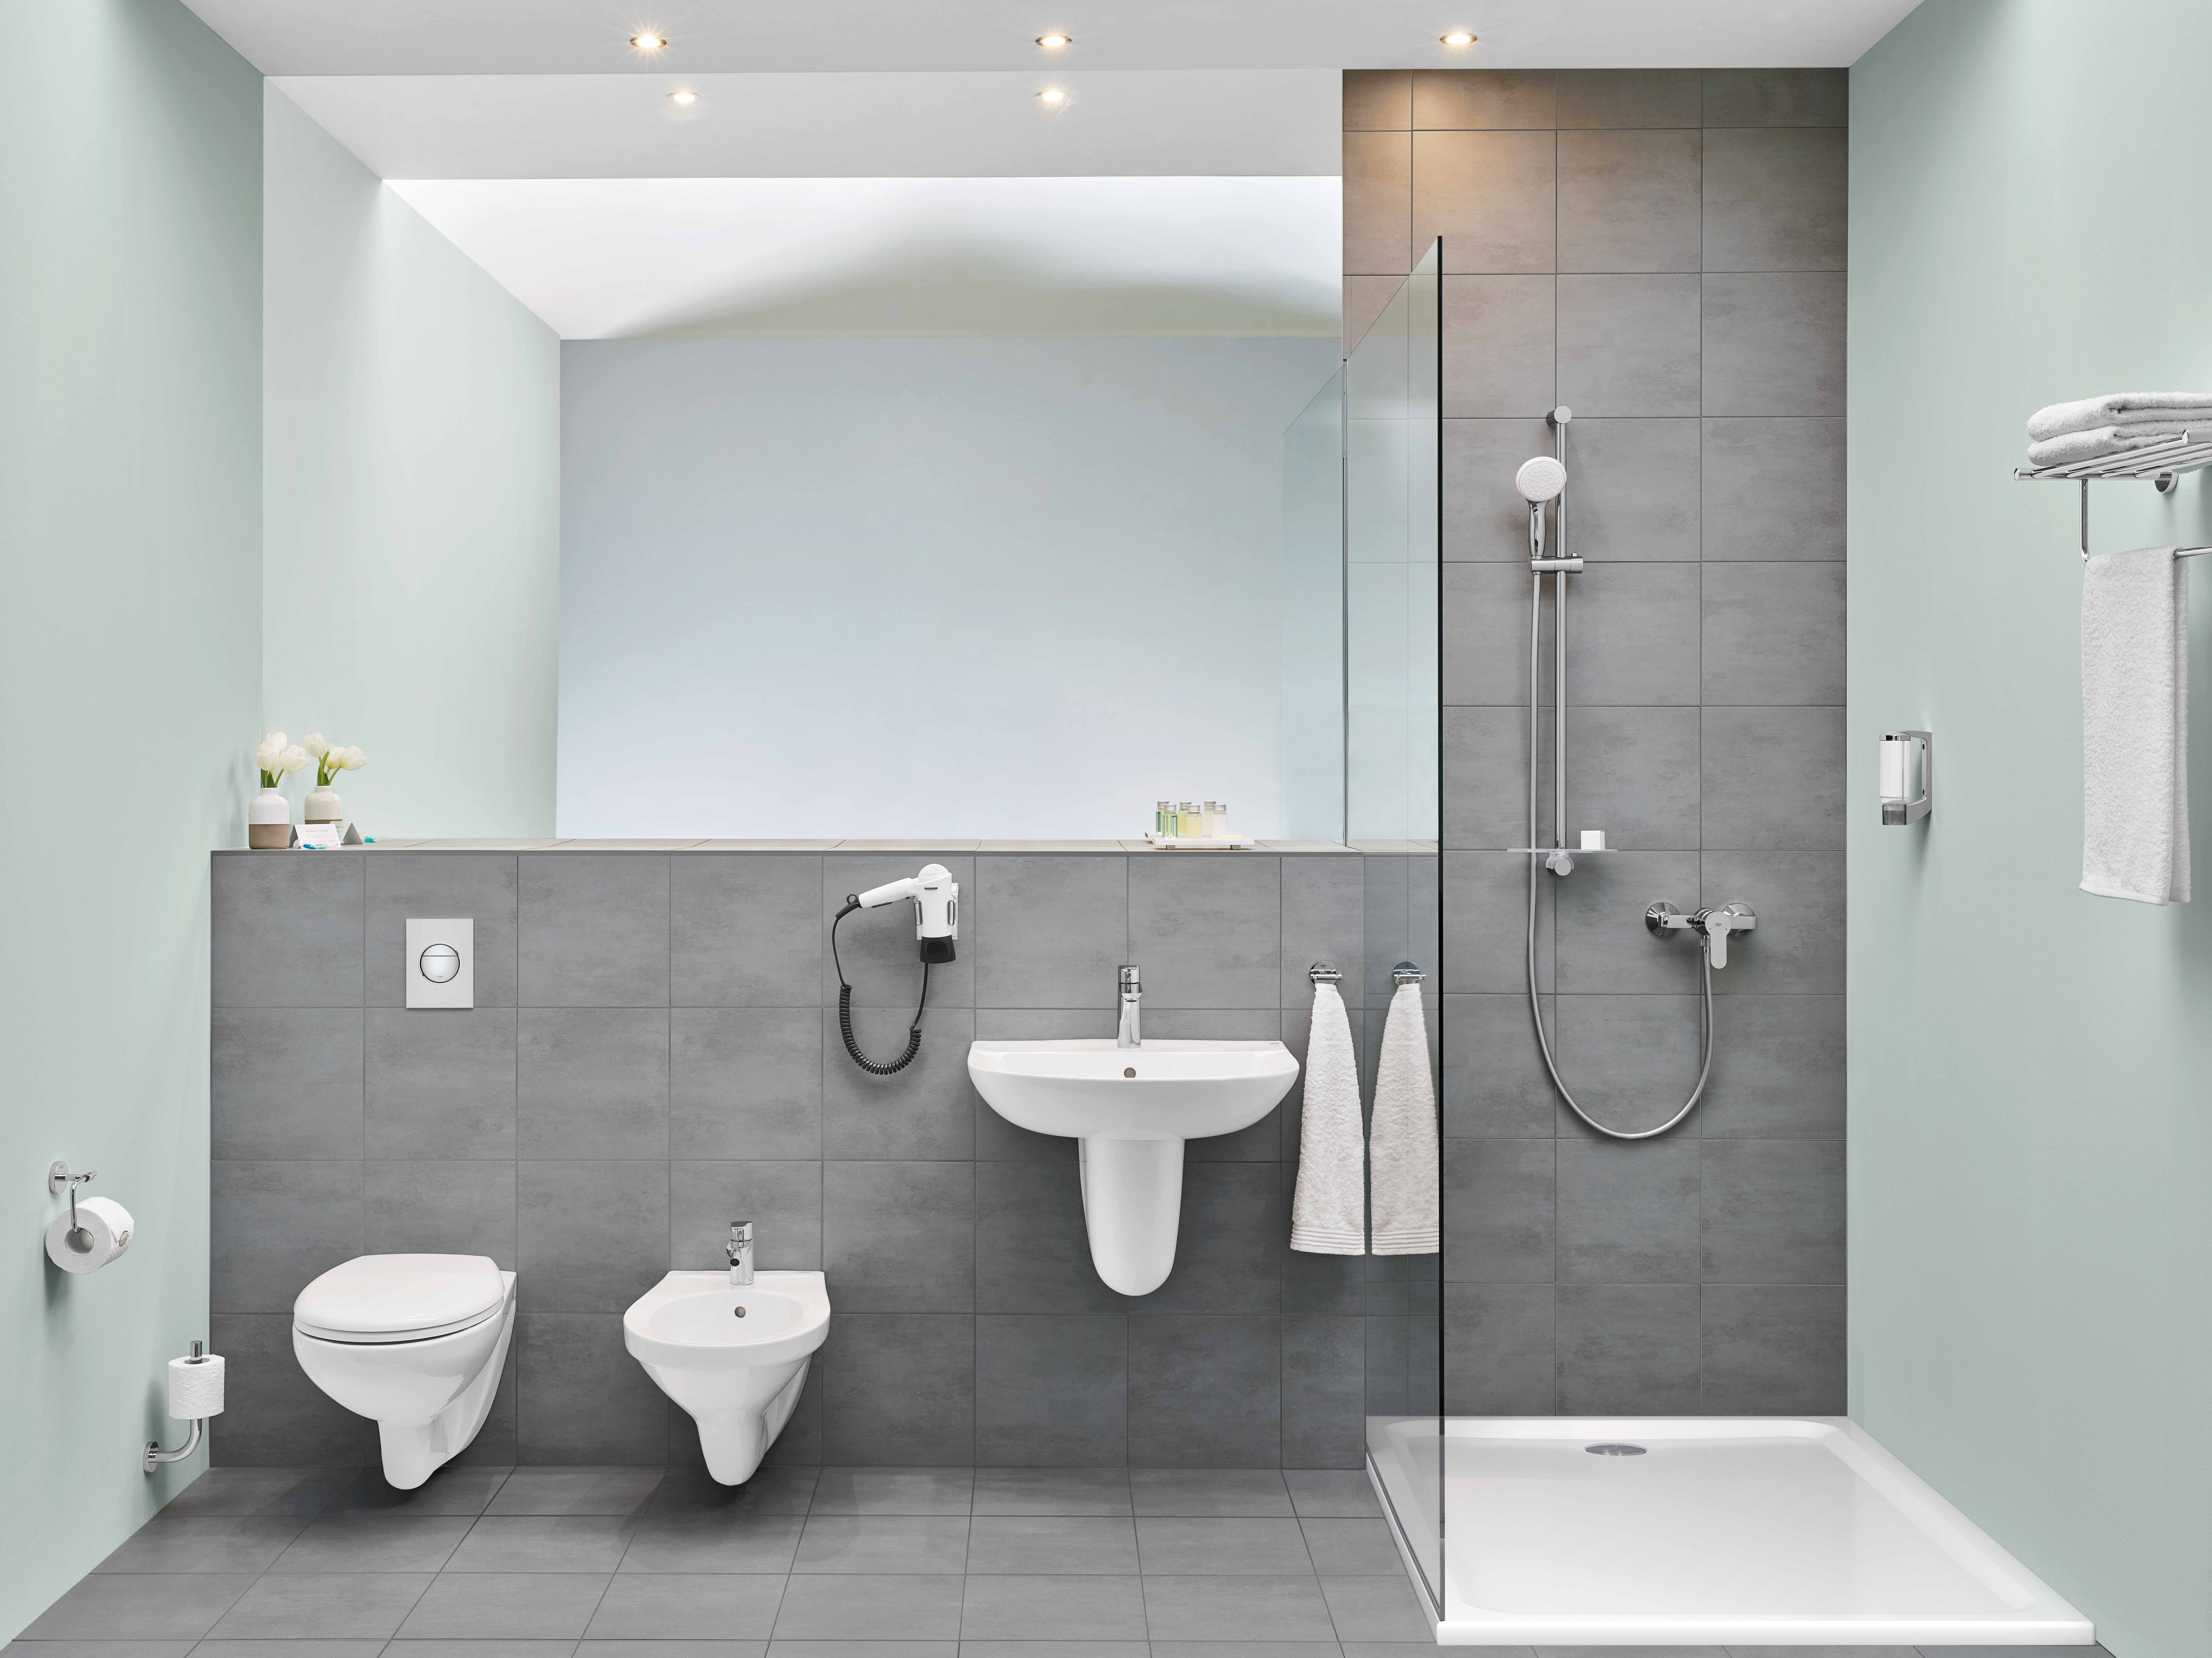  Grohe  offers accessible design solutions Professional 